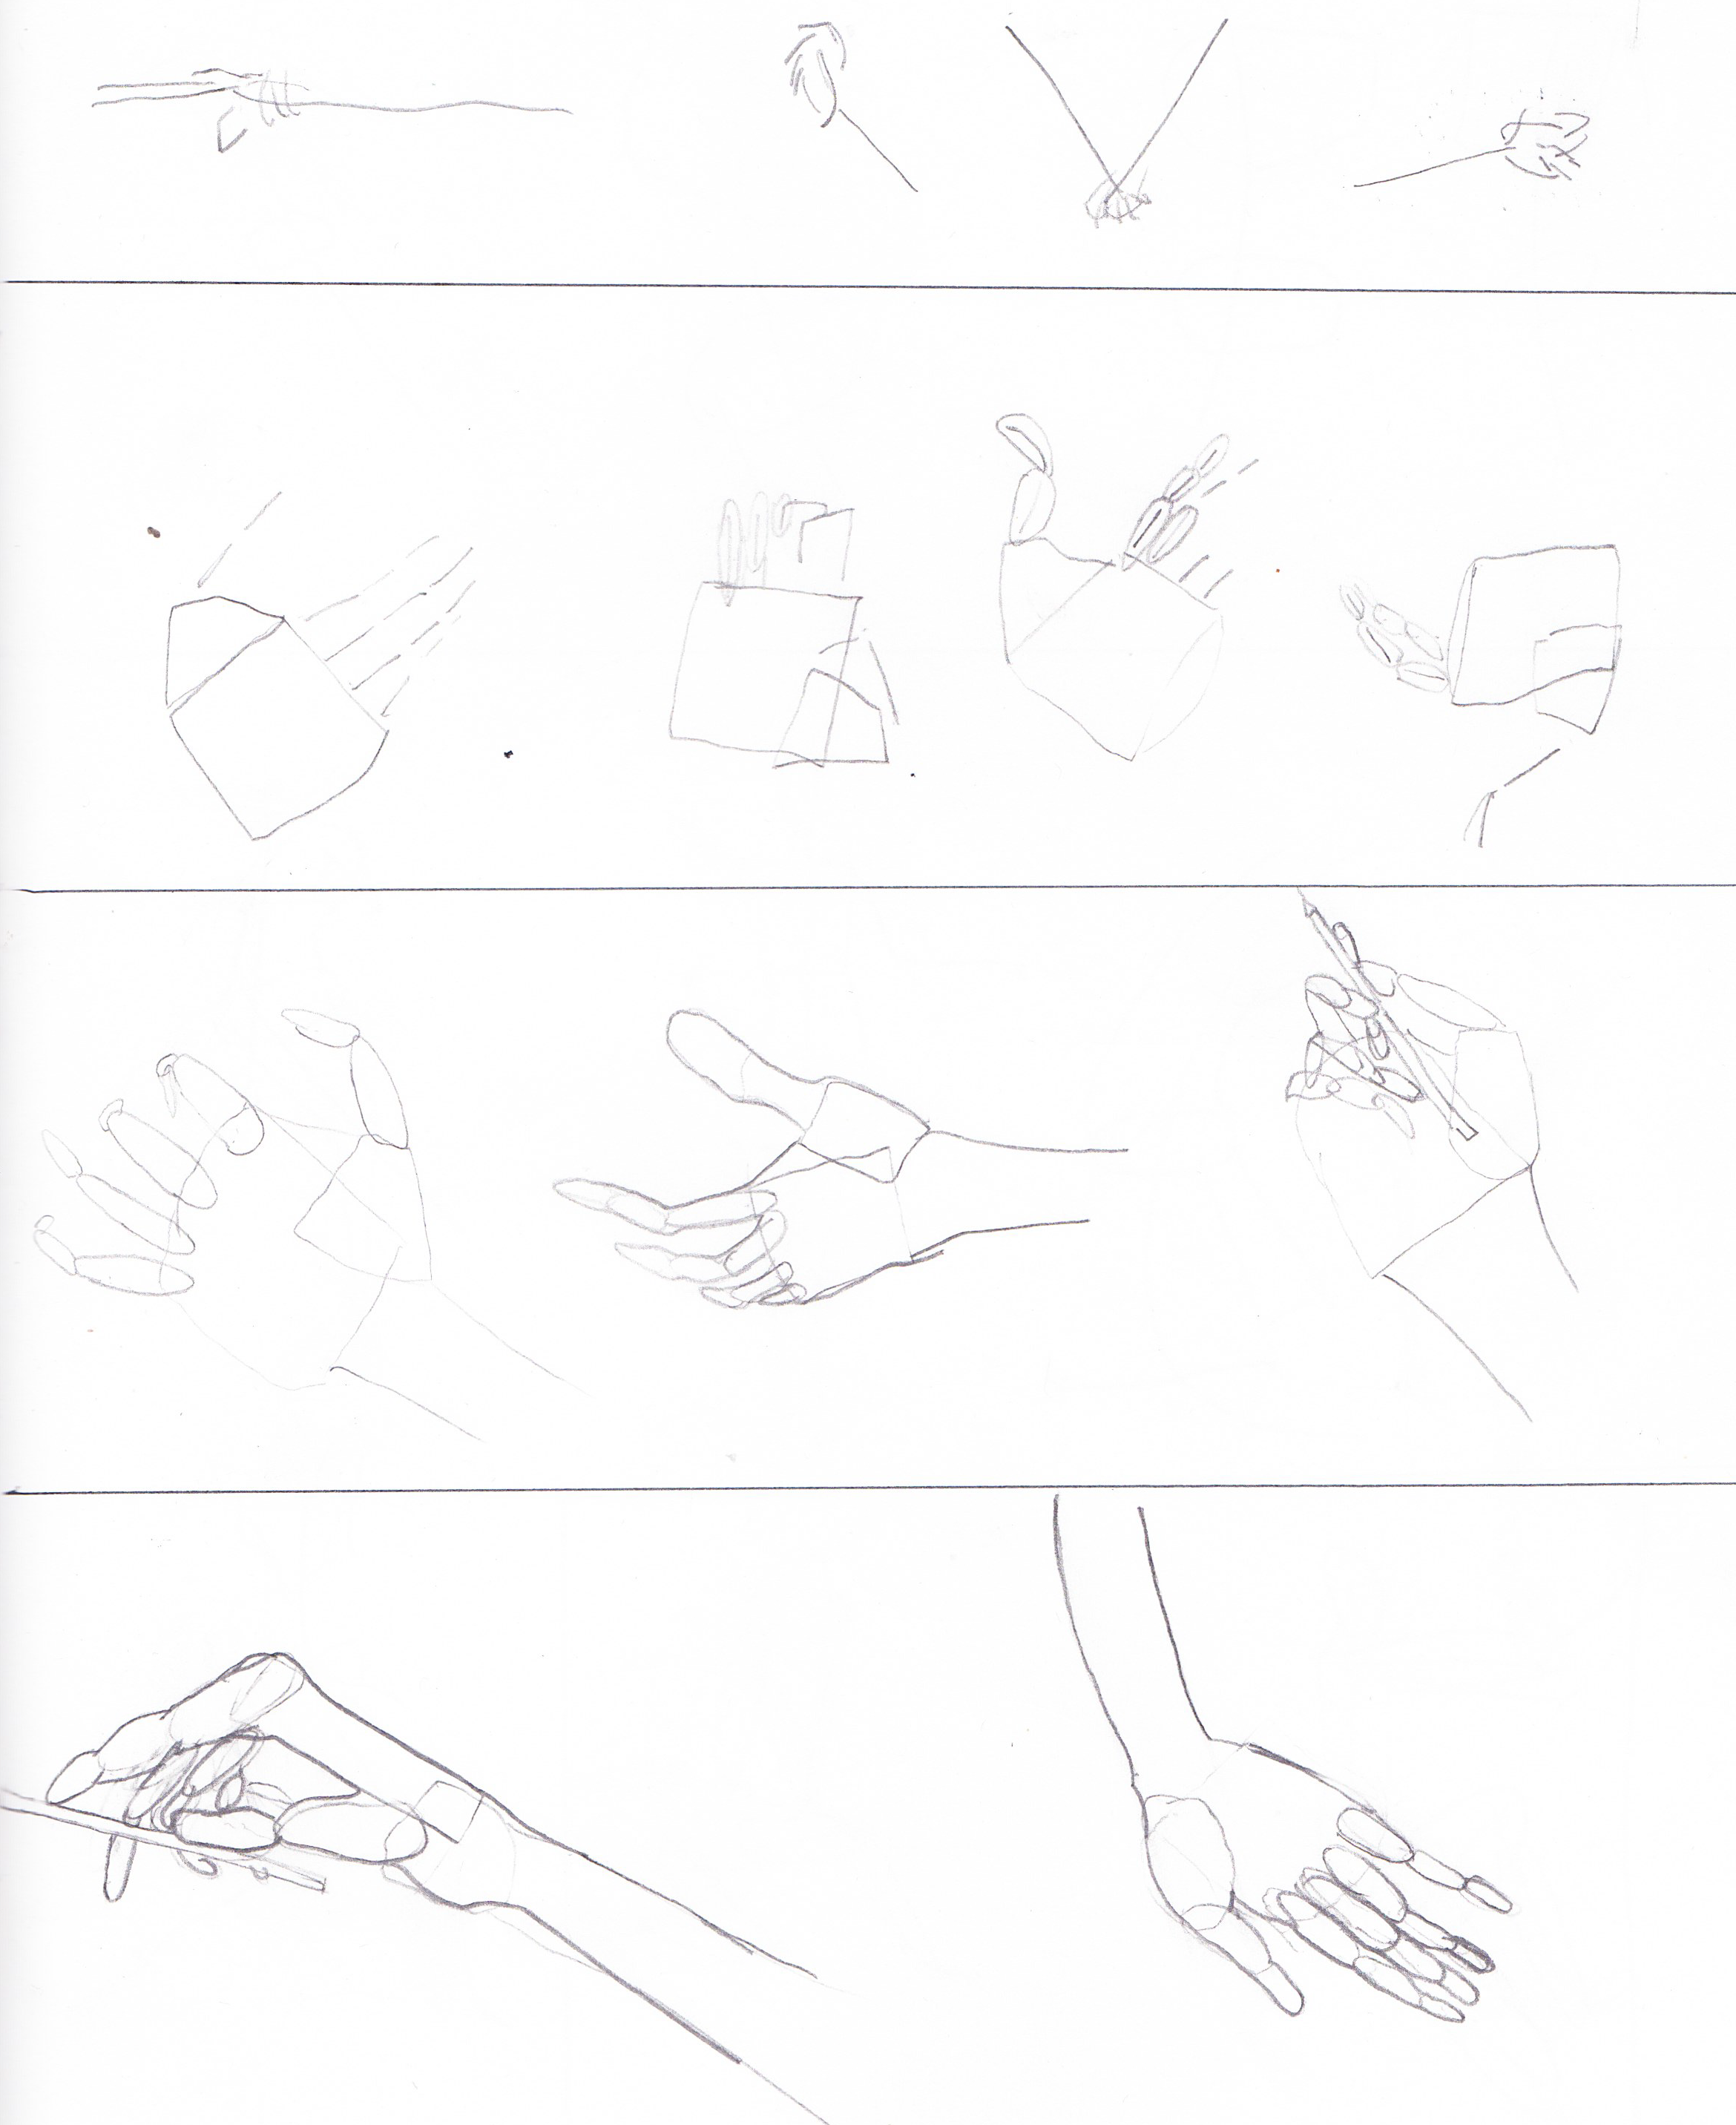 Hands - Day 323 - Learning to Draw